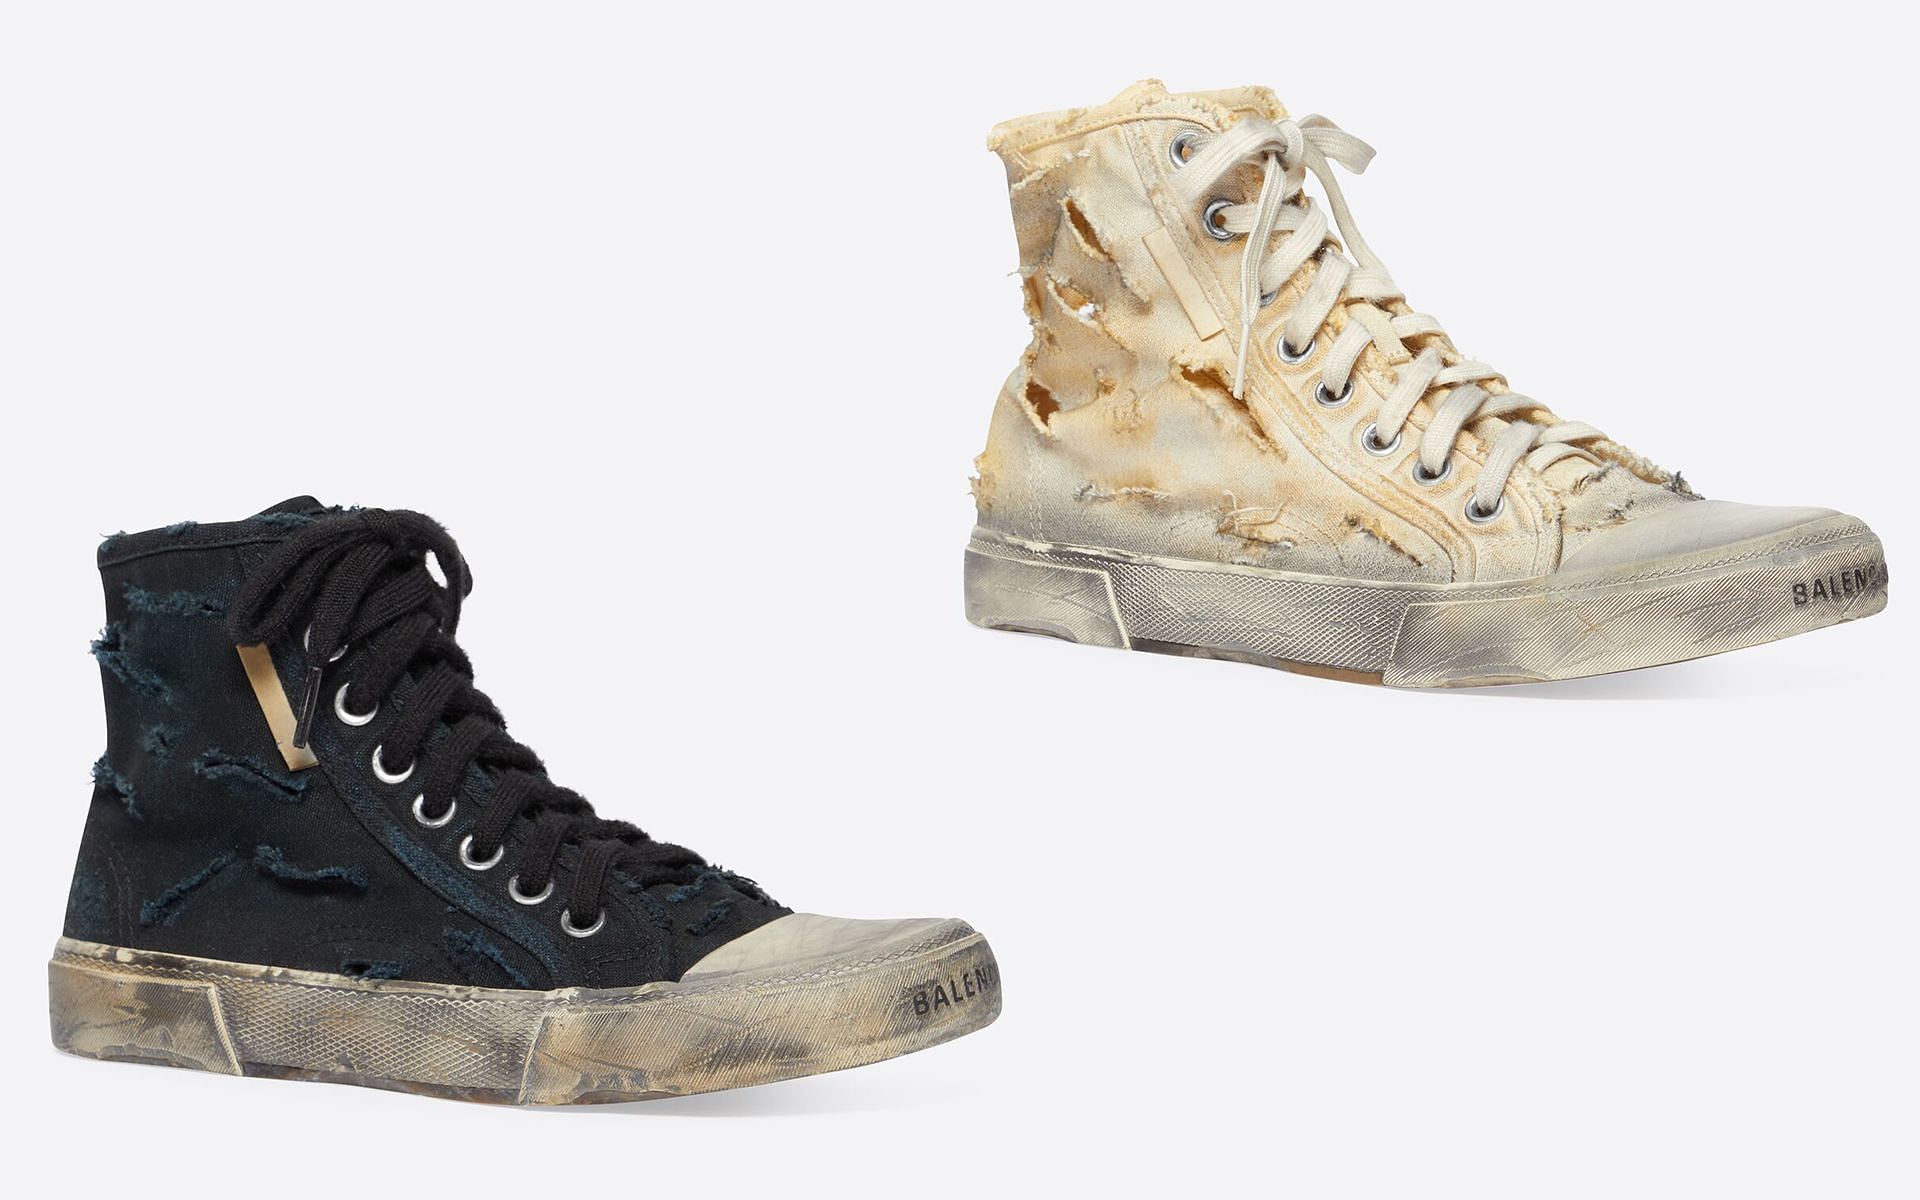 Balenciagas 1850 Full Destroyed Sneakers Are the Talk of The Internet